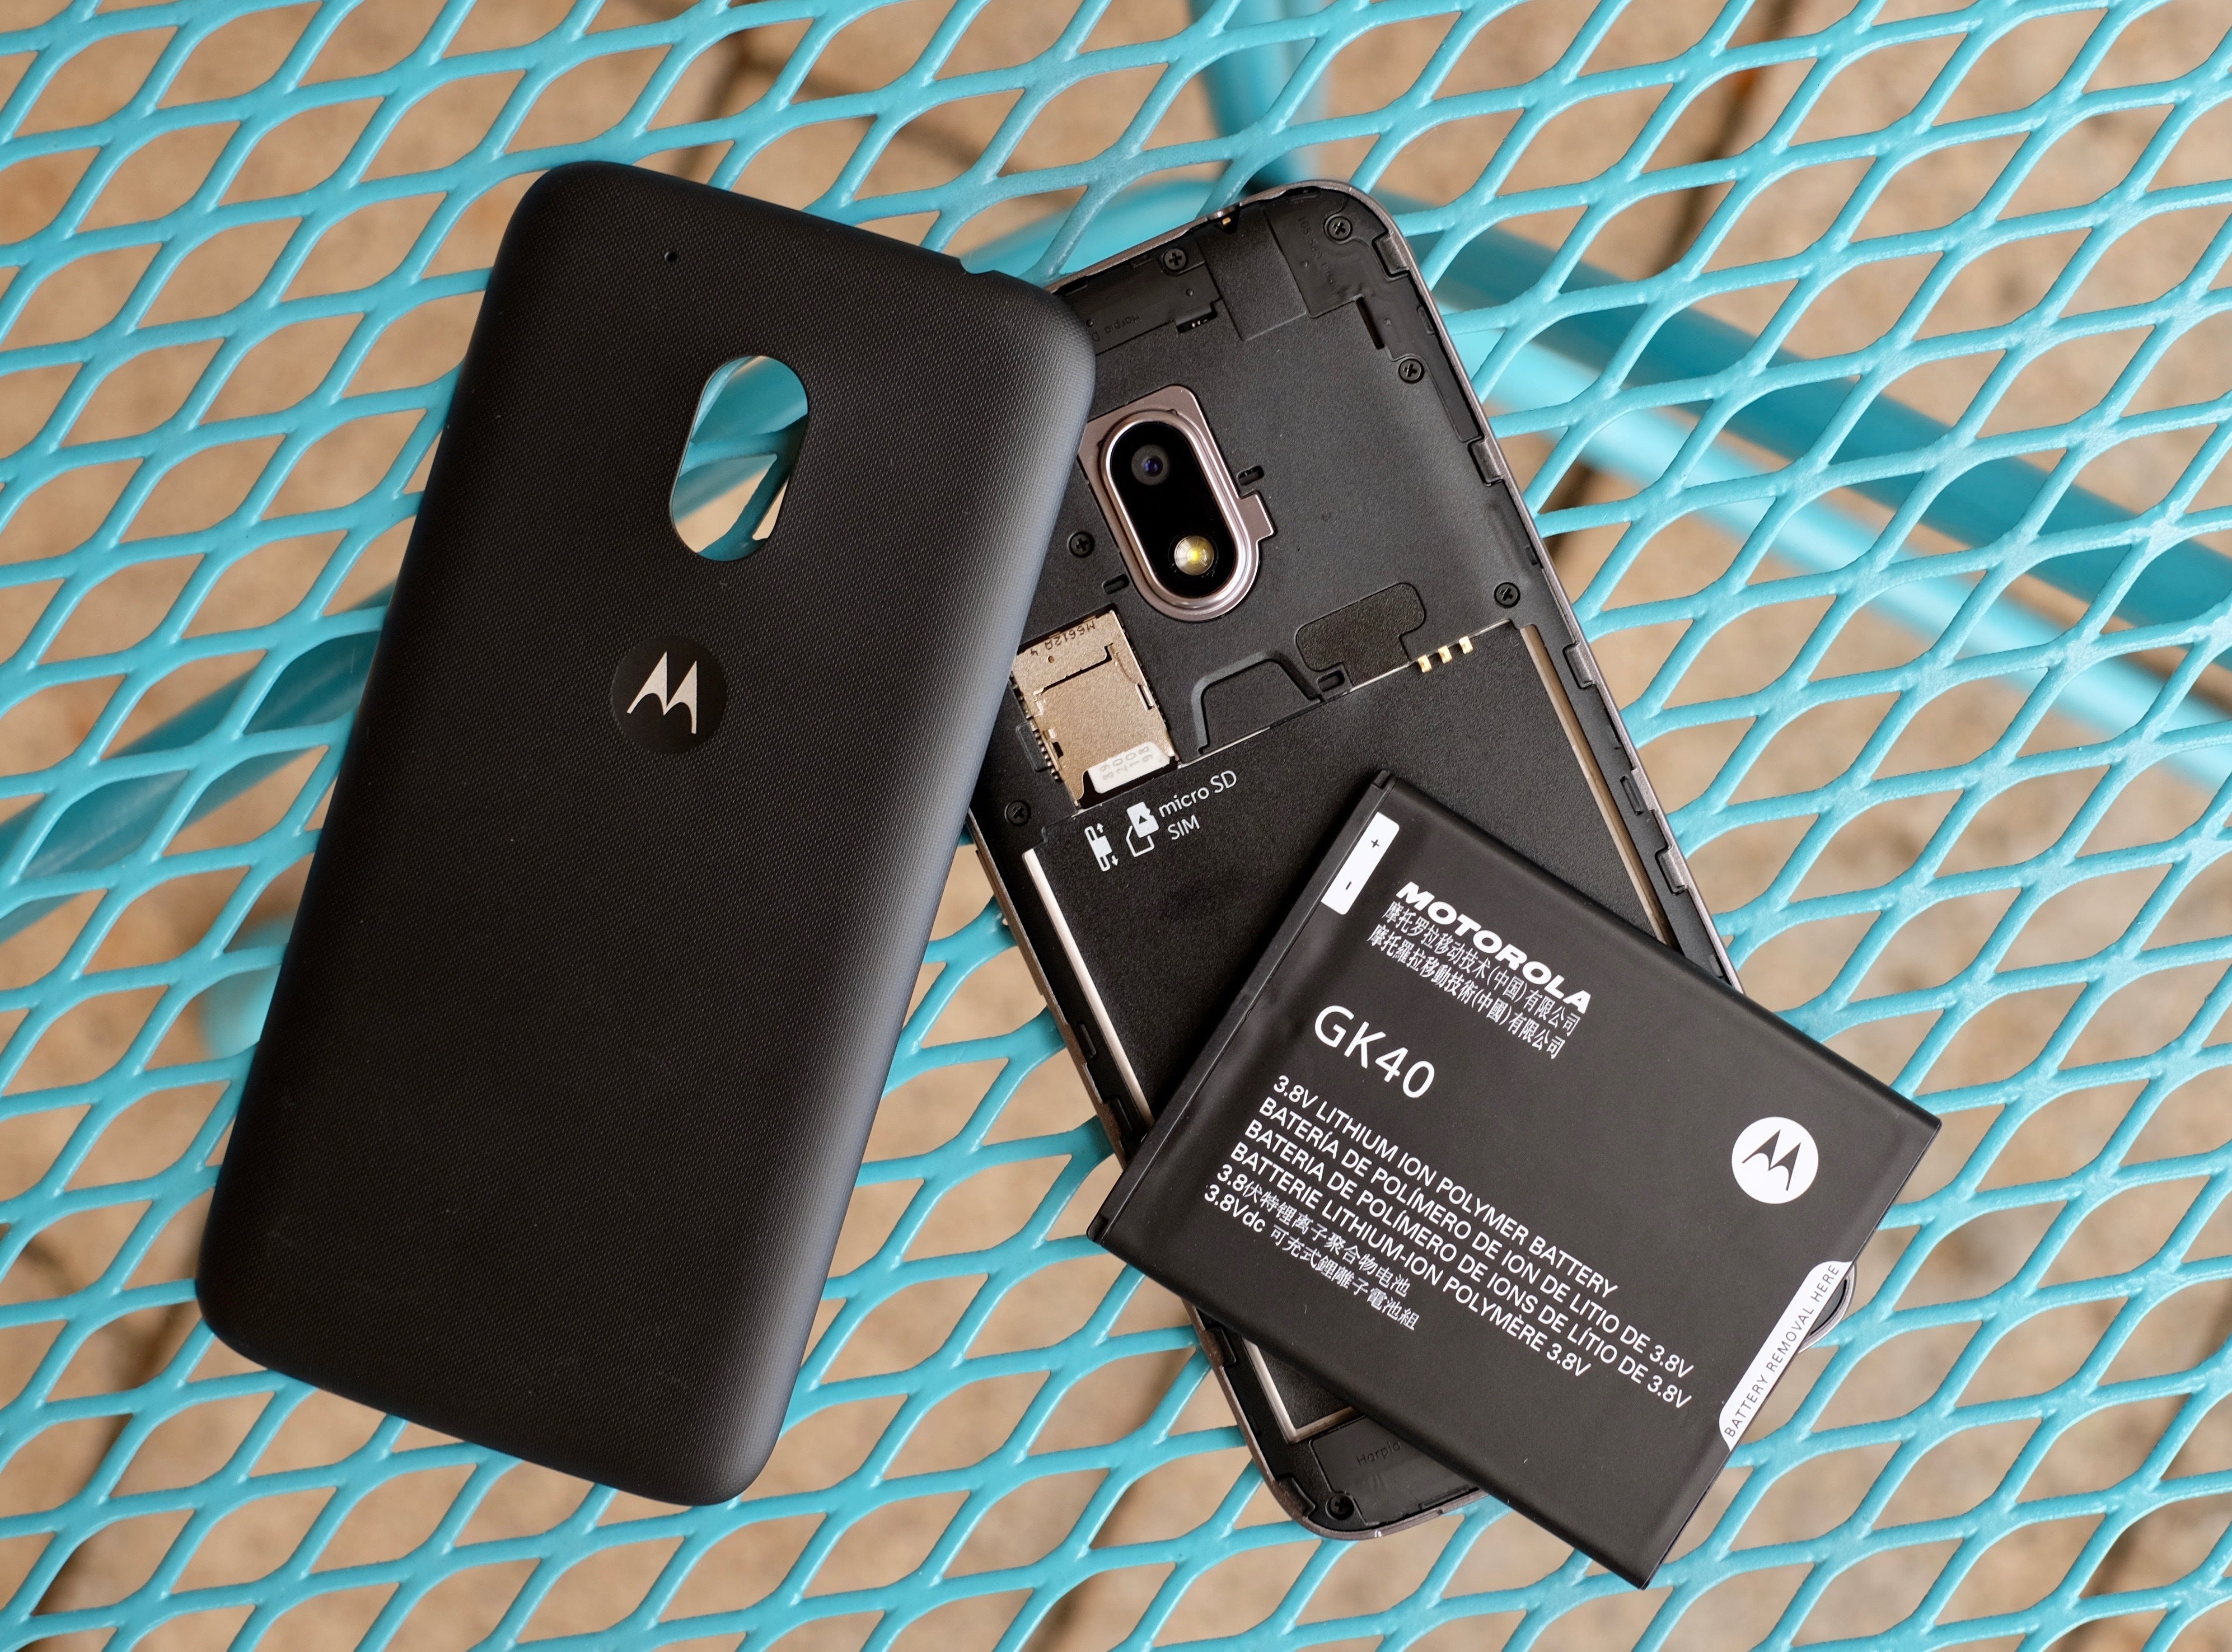 Review: Without quick updates the Moto G4 is merely good, not great